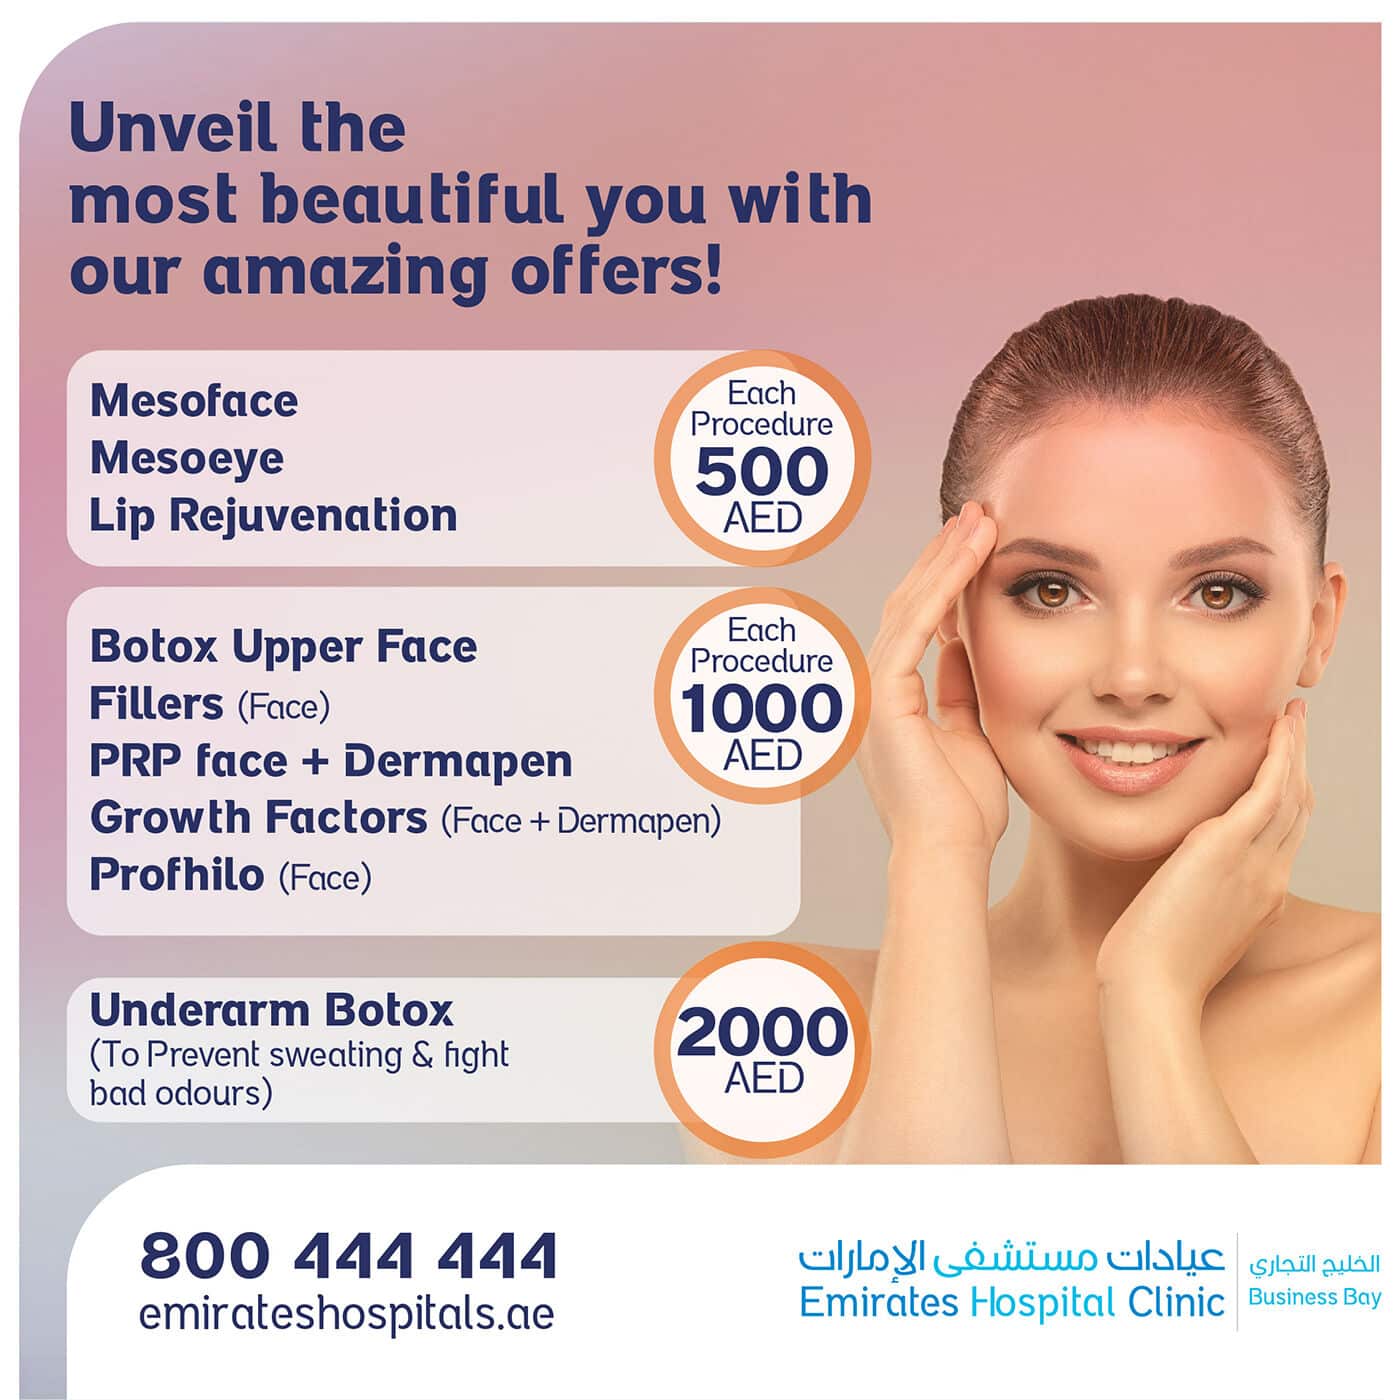 Special Offers on Dermatology Procedures ,Emirates Hospital Clinic, Business Bay